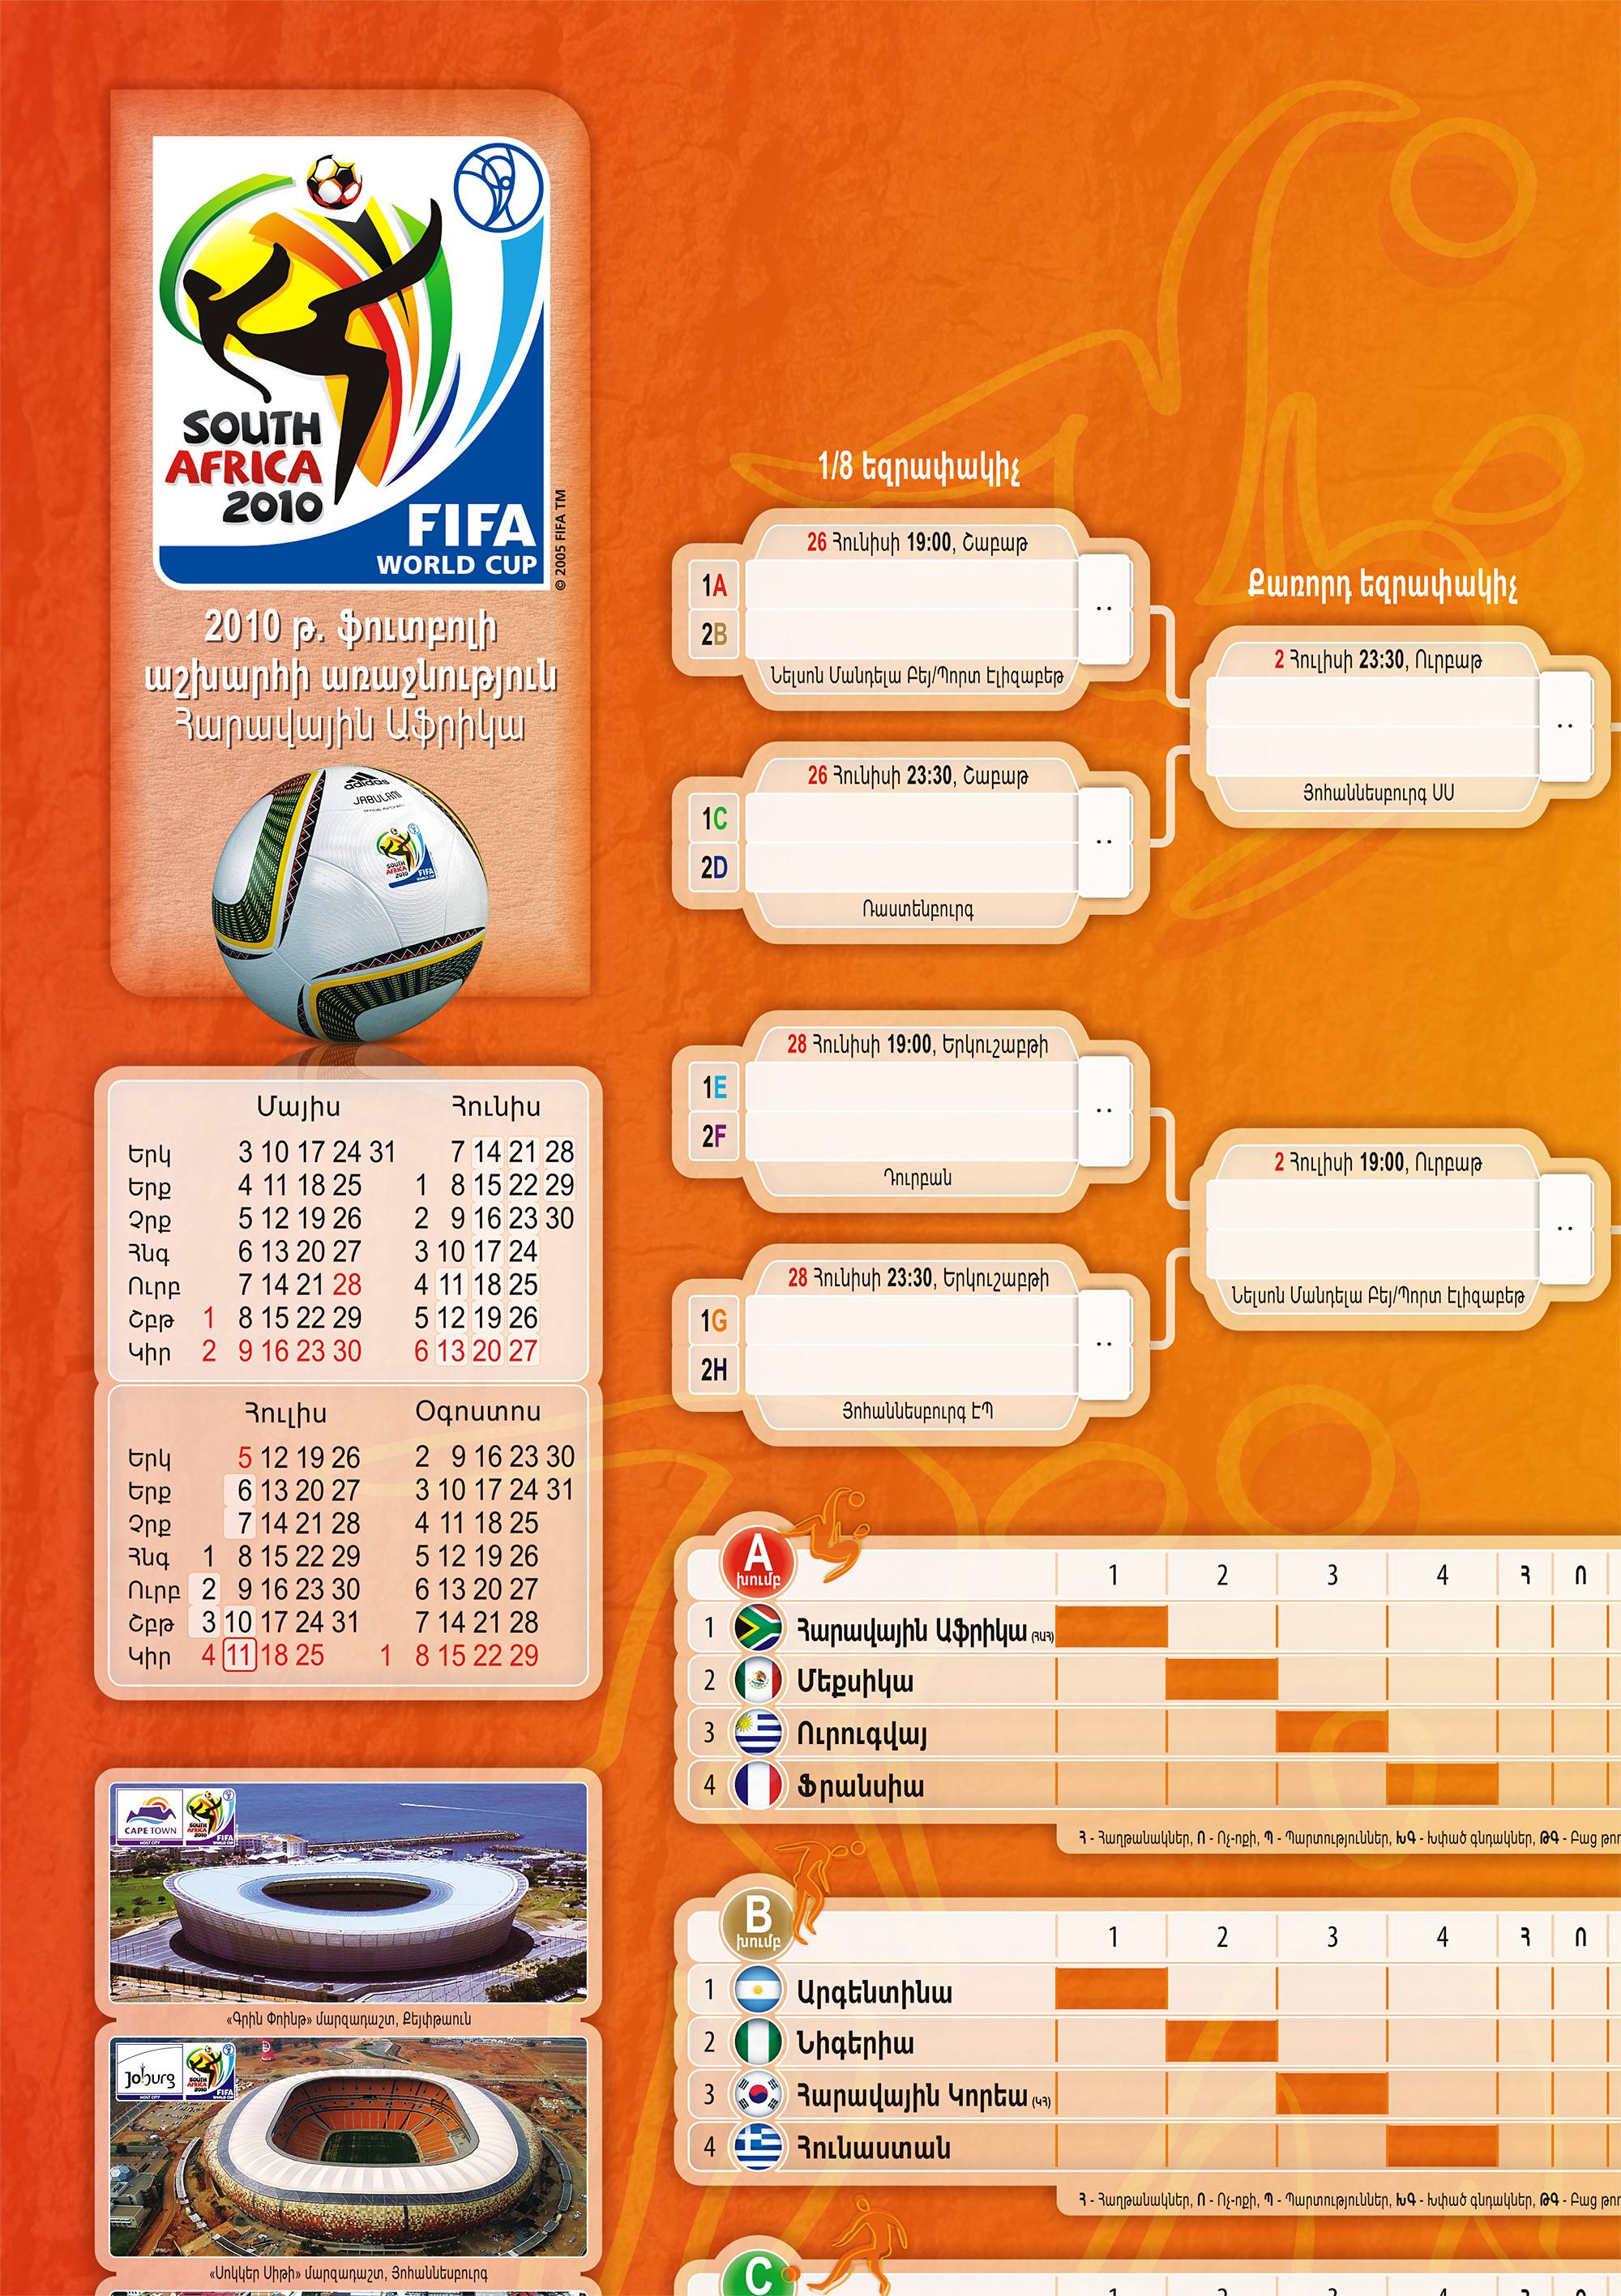 2010 FWC Wallchart-2010 FIFA World Cup South Africa Poster Design